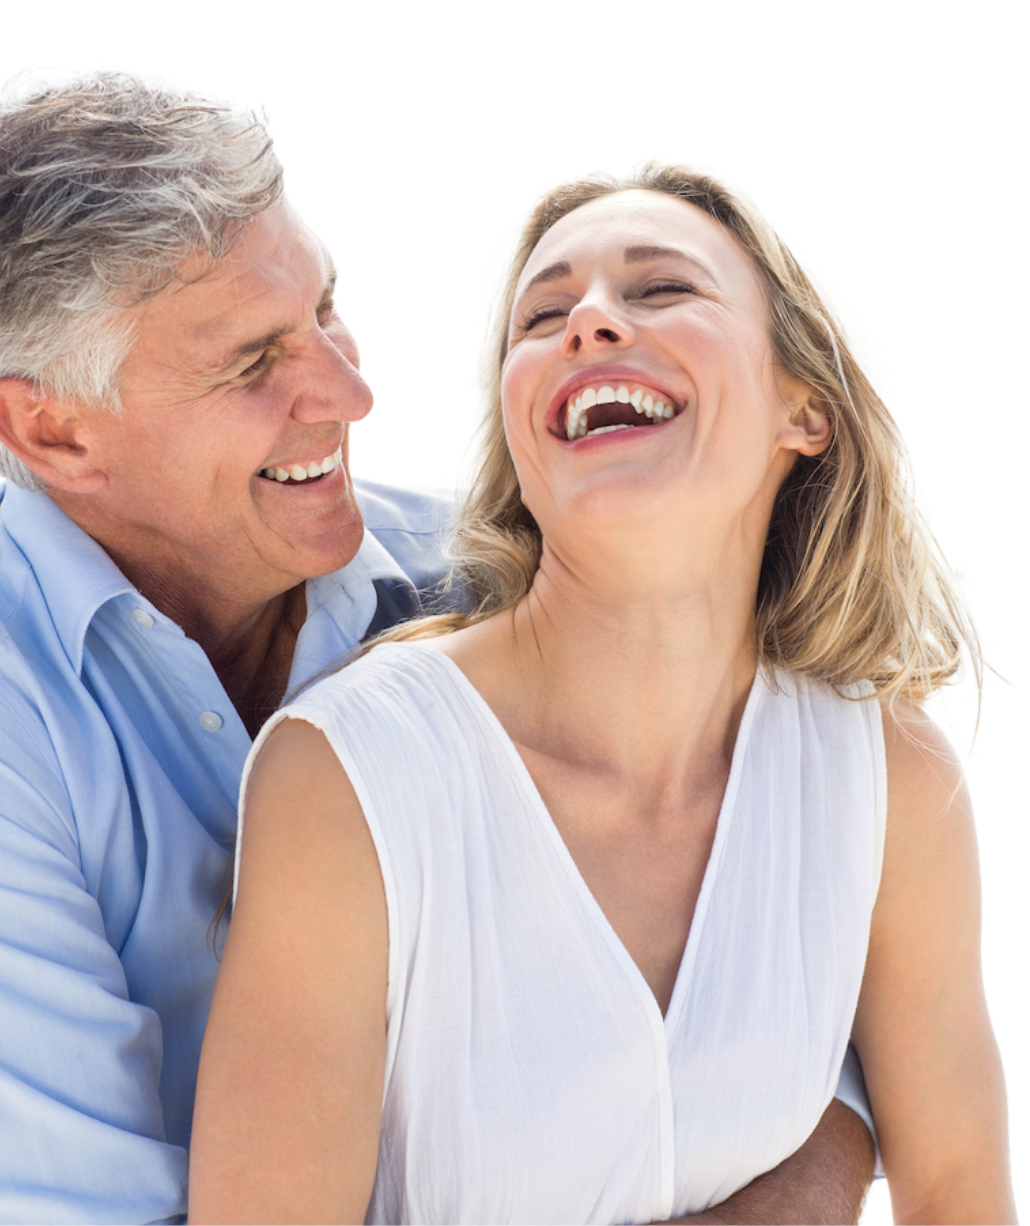 Laughing Middle Age Couple